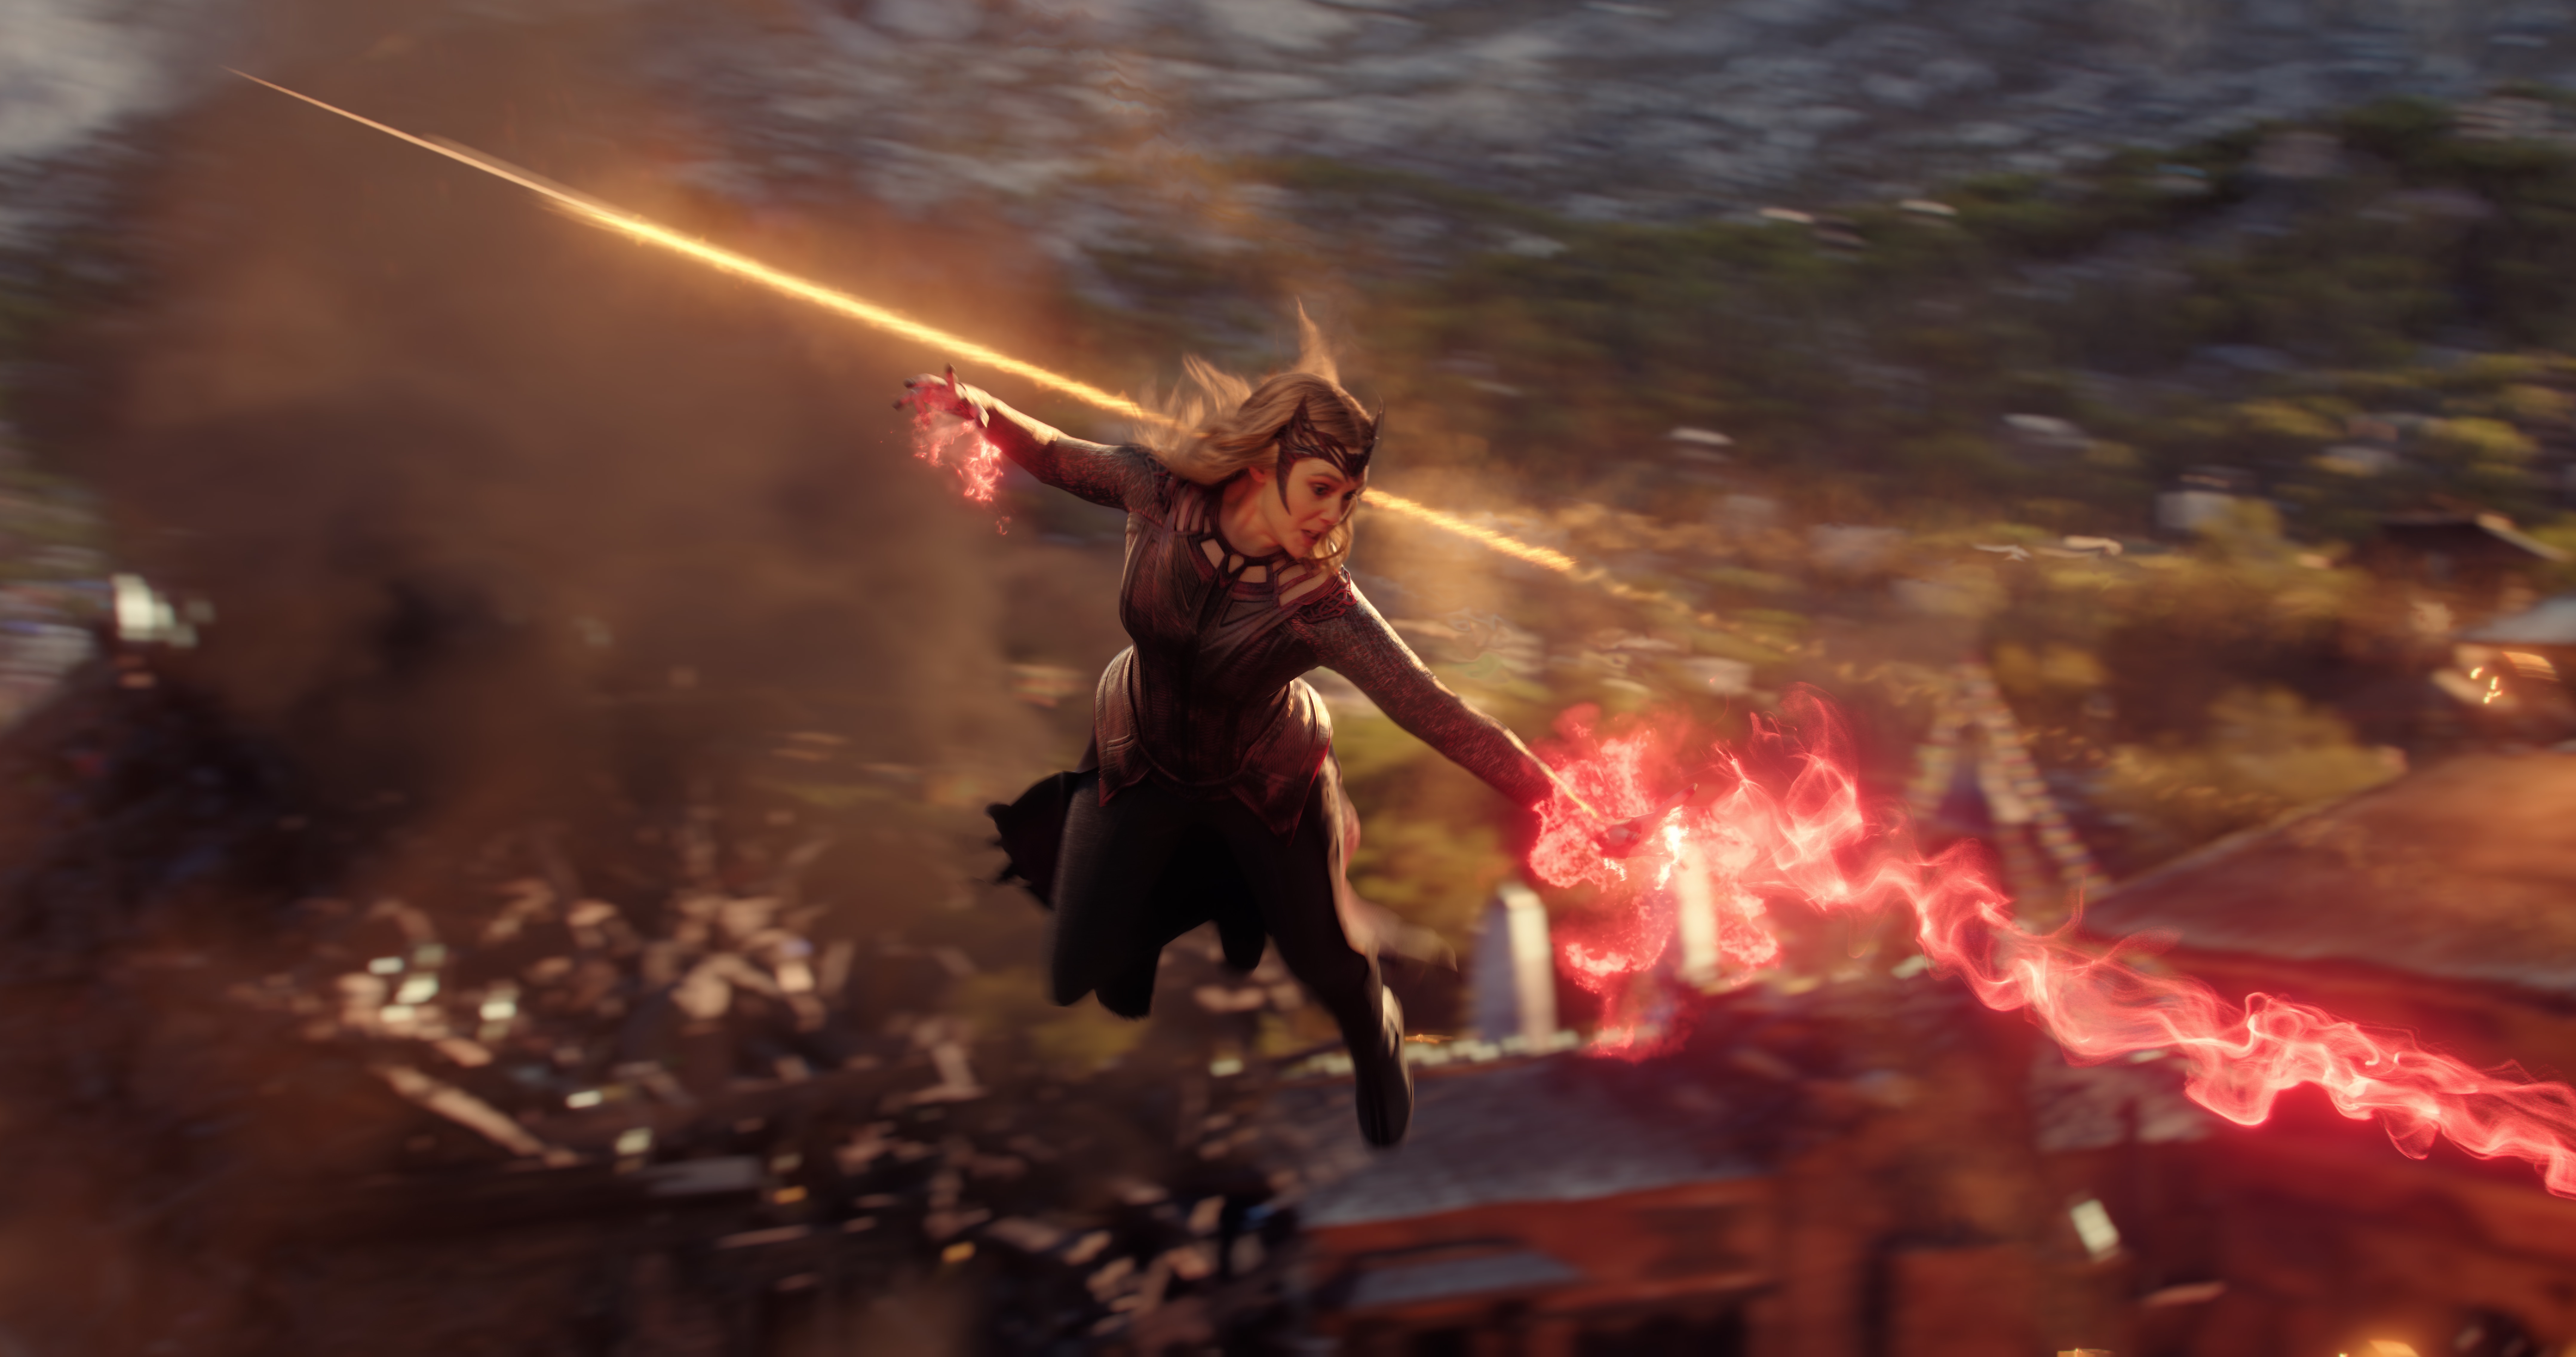 Scarlet Witch shoots a red beam of energy.